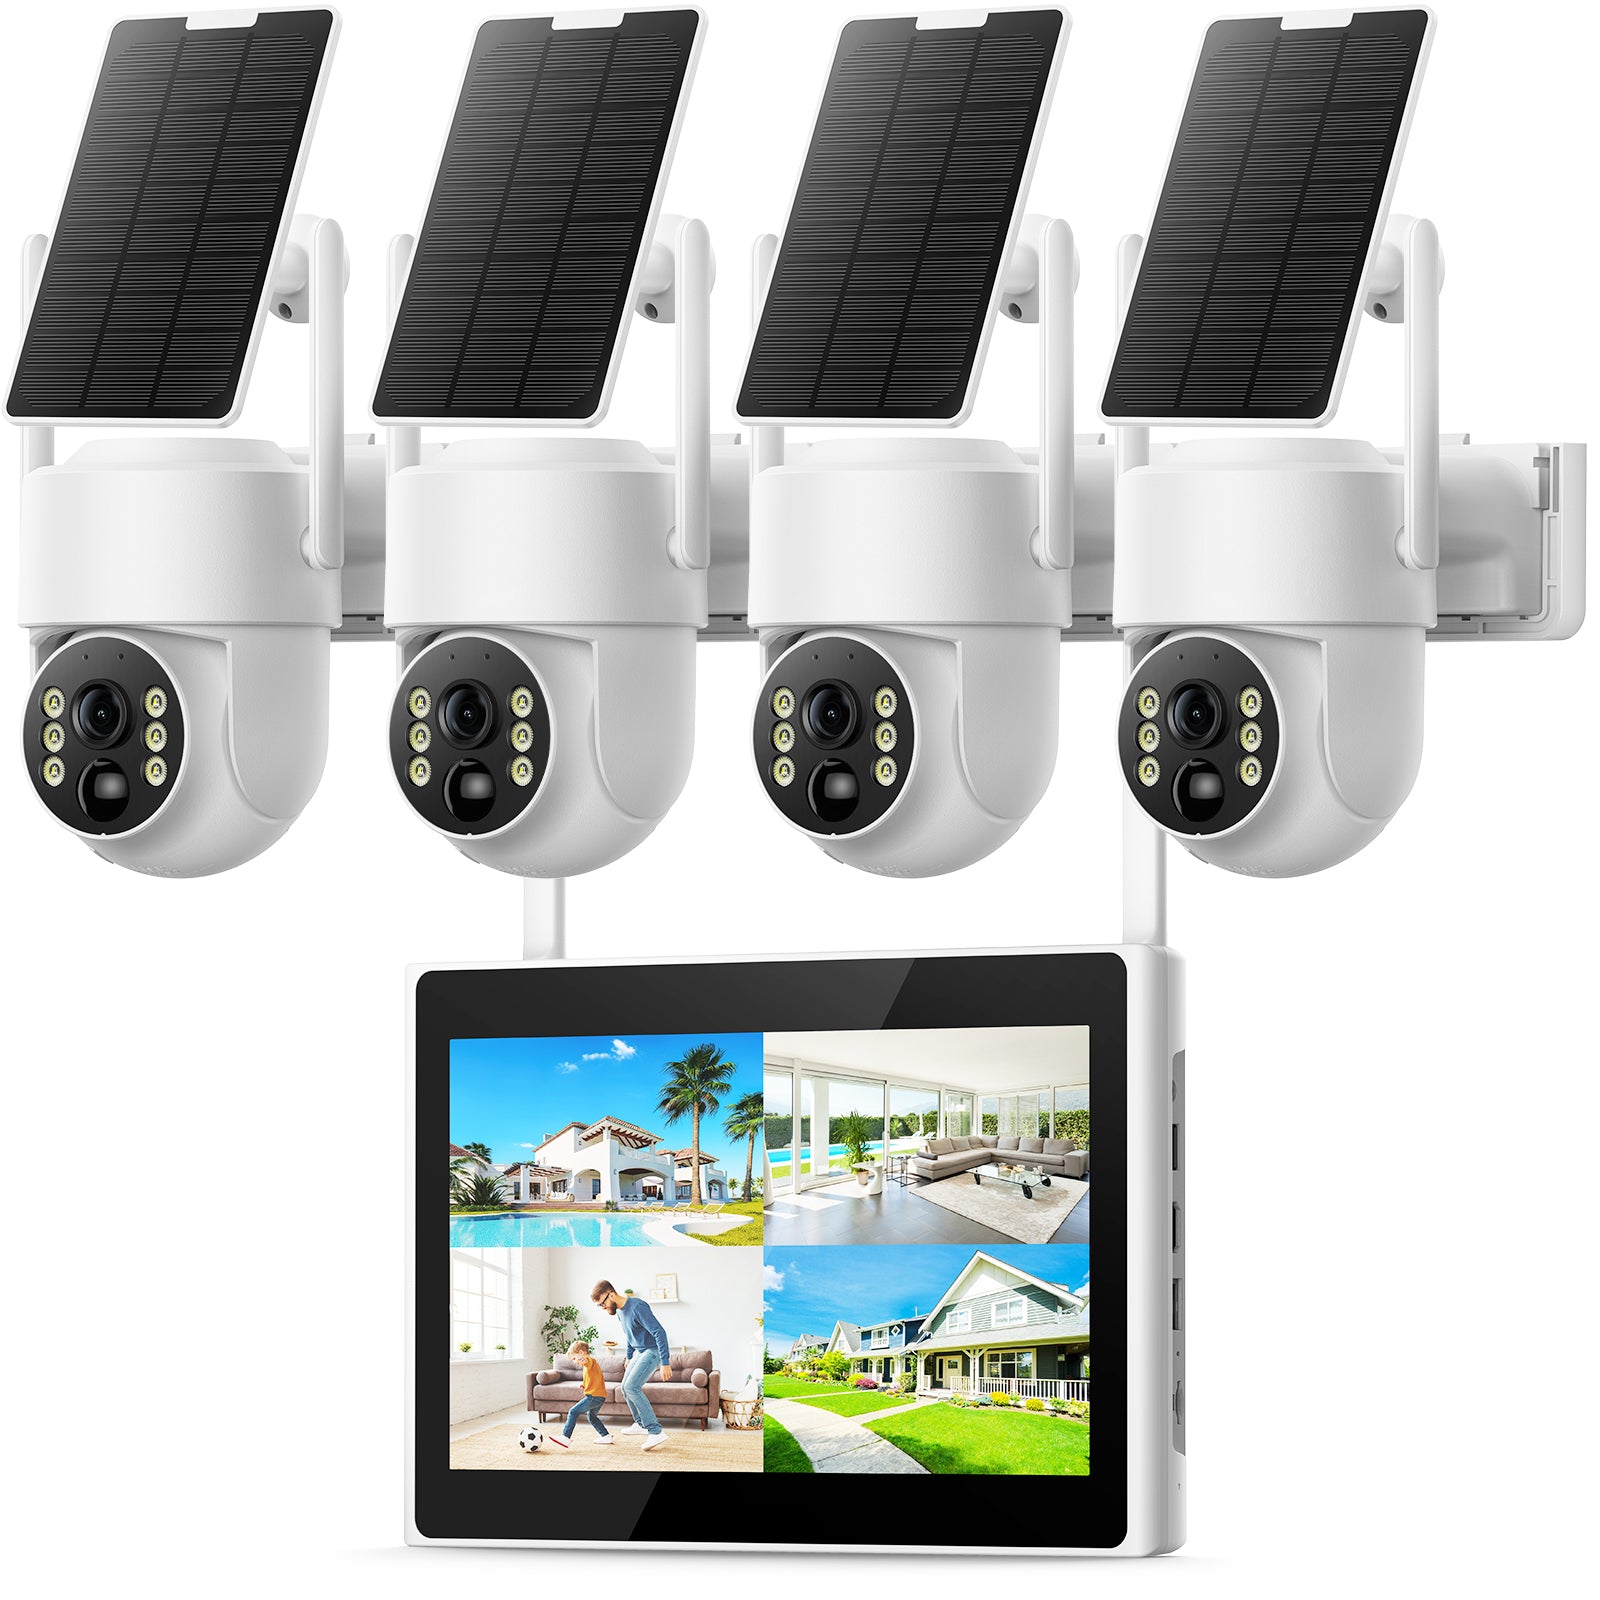  2K Solar Security Camera System Wireless Home Security Cam with 10'' 10CH NVR Monitor and 500GB HDD, Color Night Vision